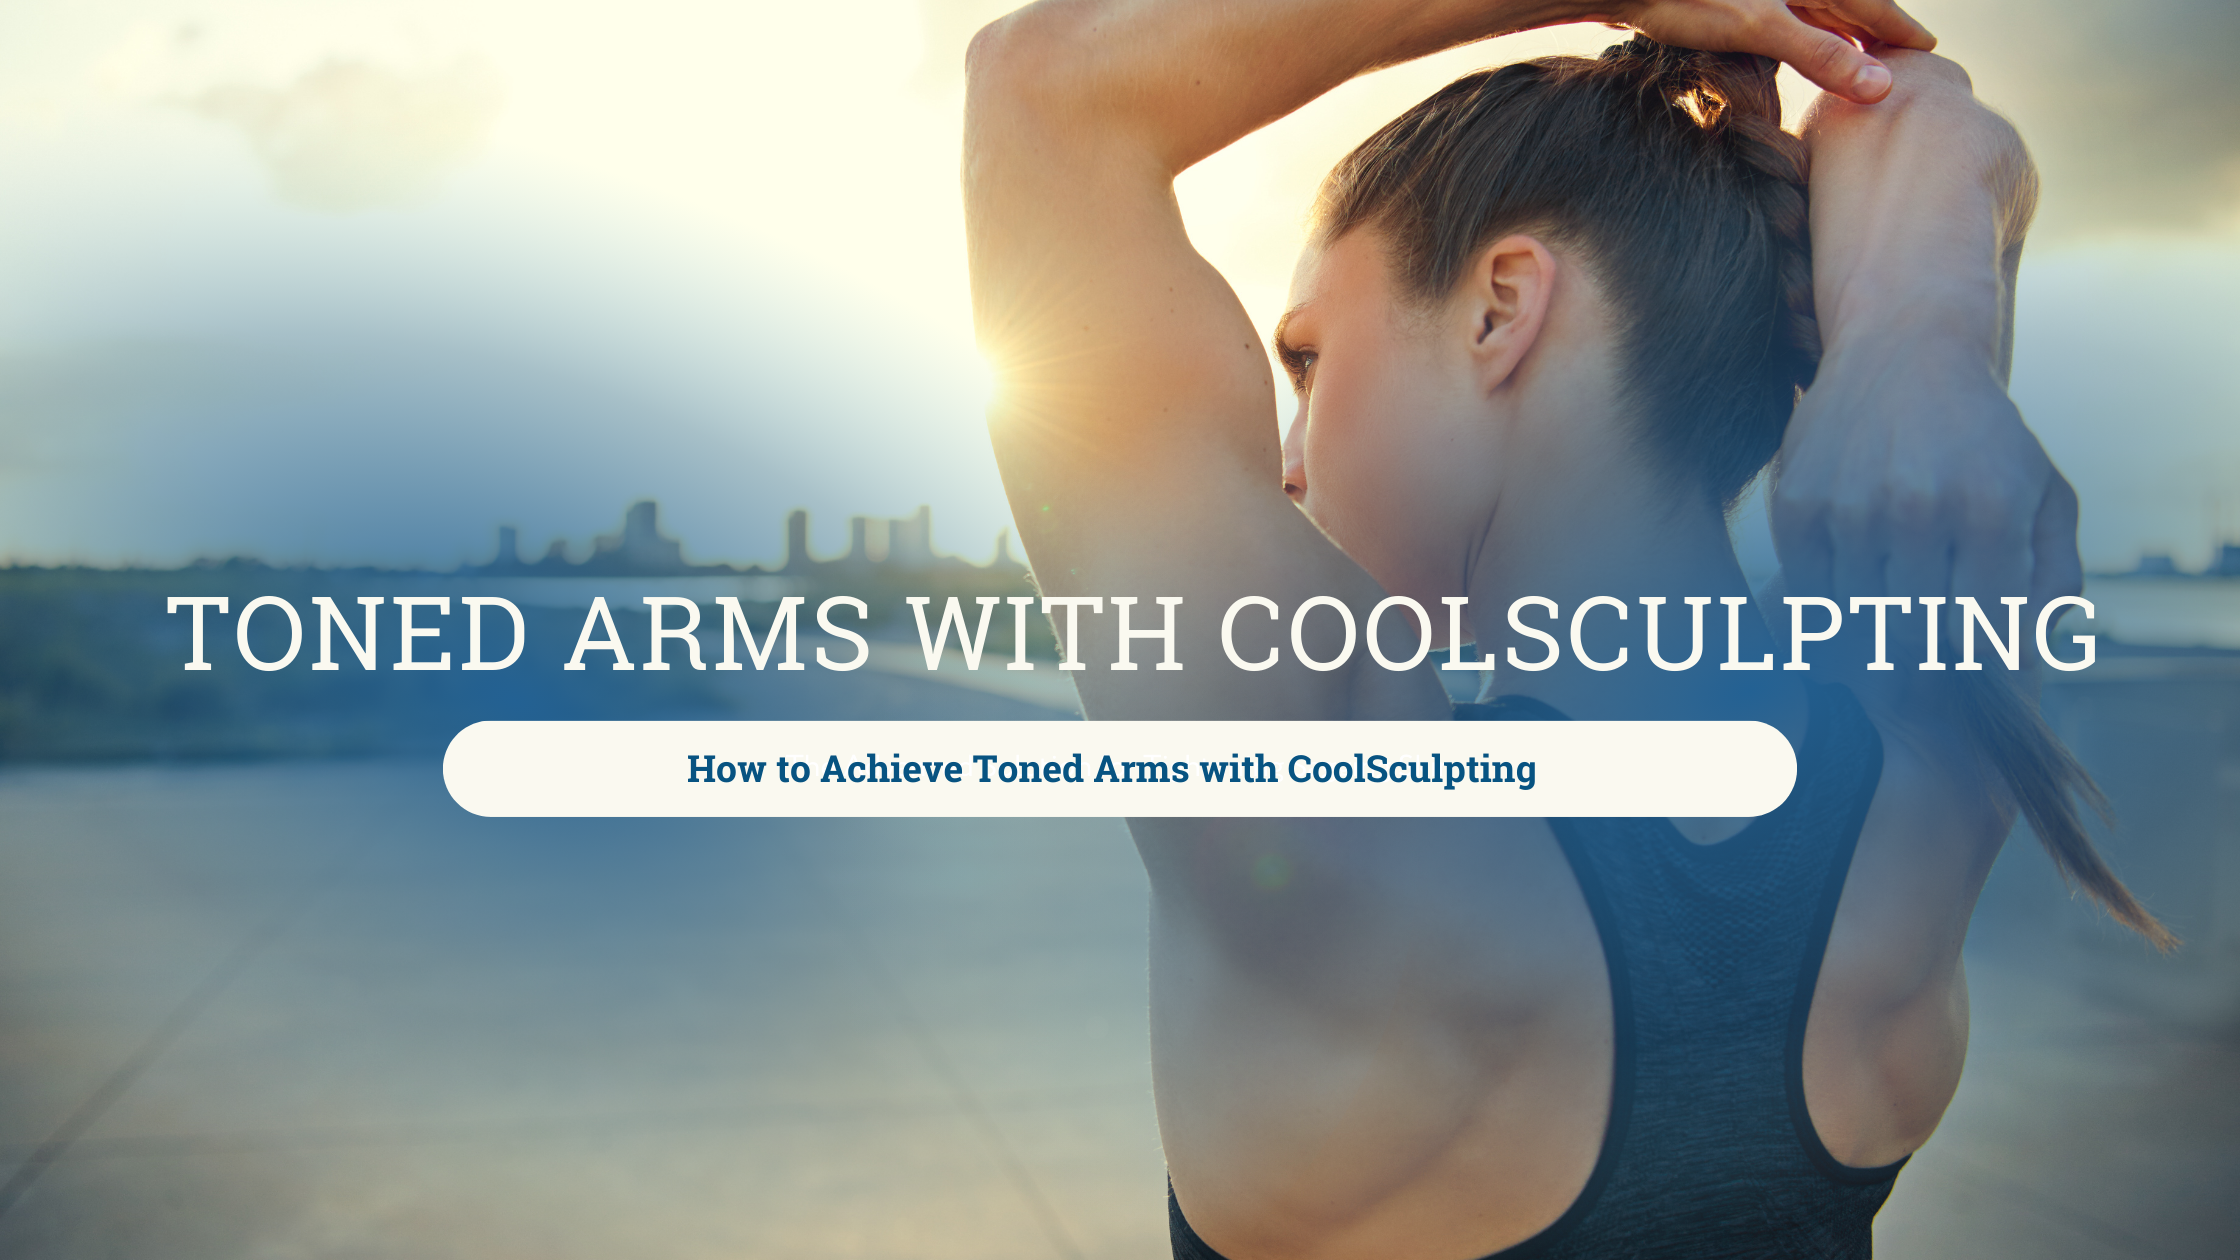 How to Achieve Toned Arms with CoolSculpting